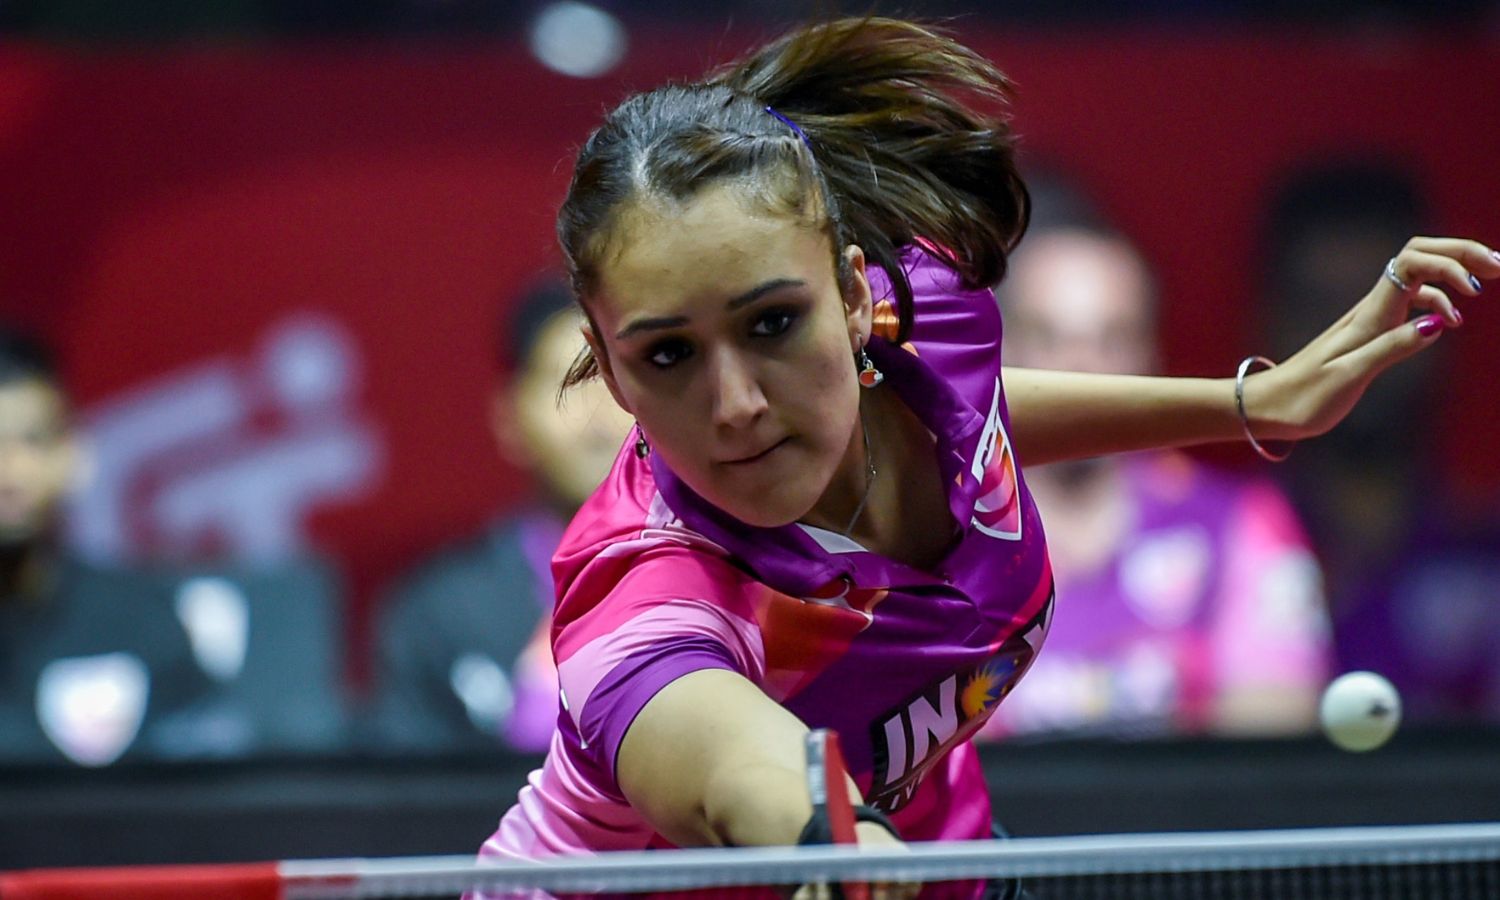 Manika Batra loses in the quarter-finals to the number 5 in the world